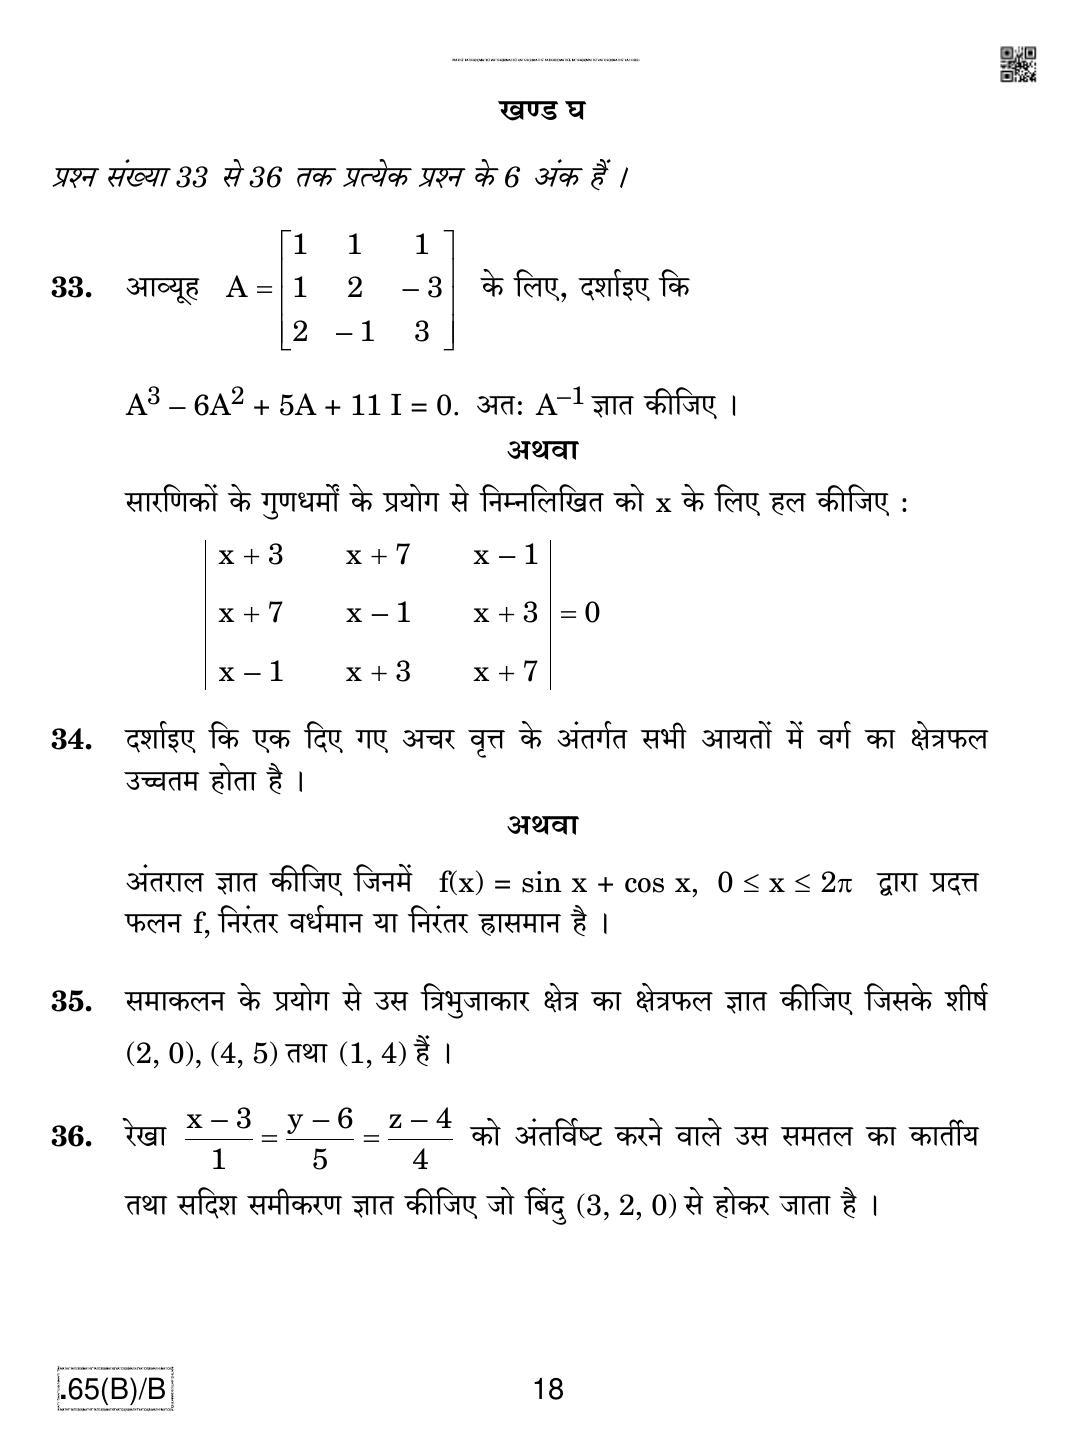 CBSE Class 12 65(B)-C - Maths For Blind Candidates 2020 Compartment Question Paper - Page 18